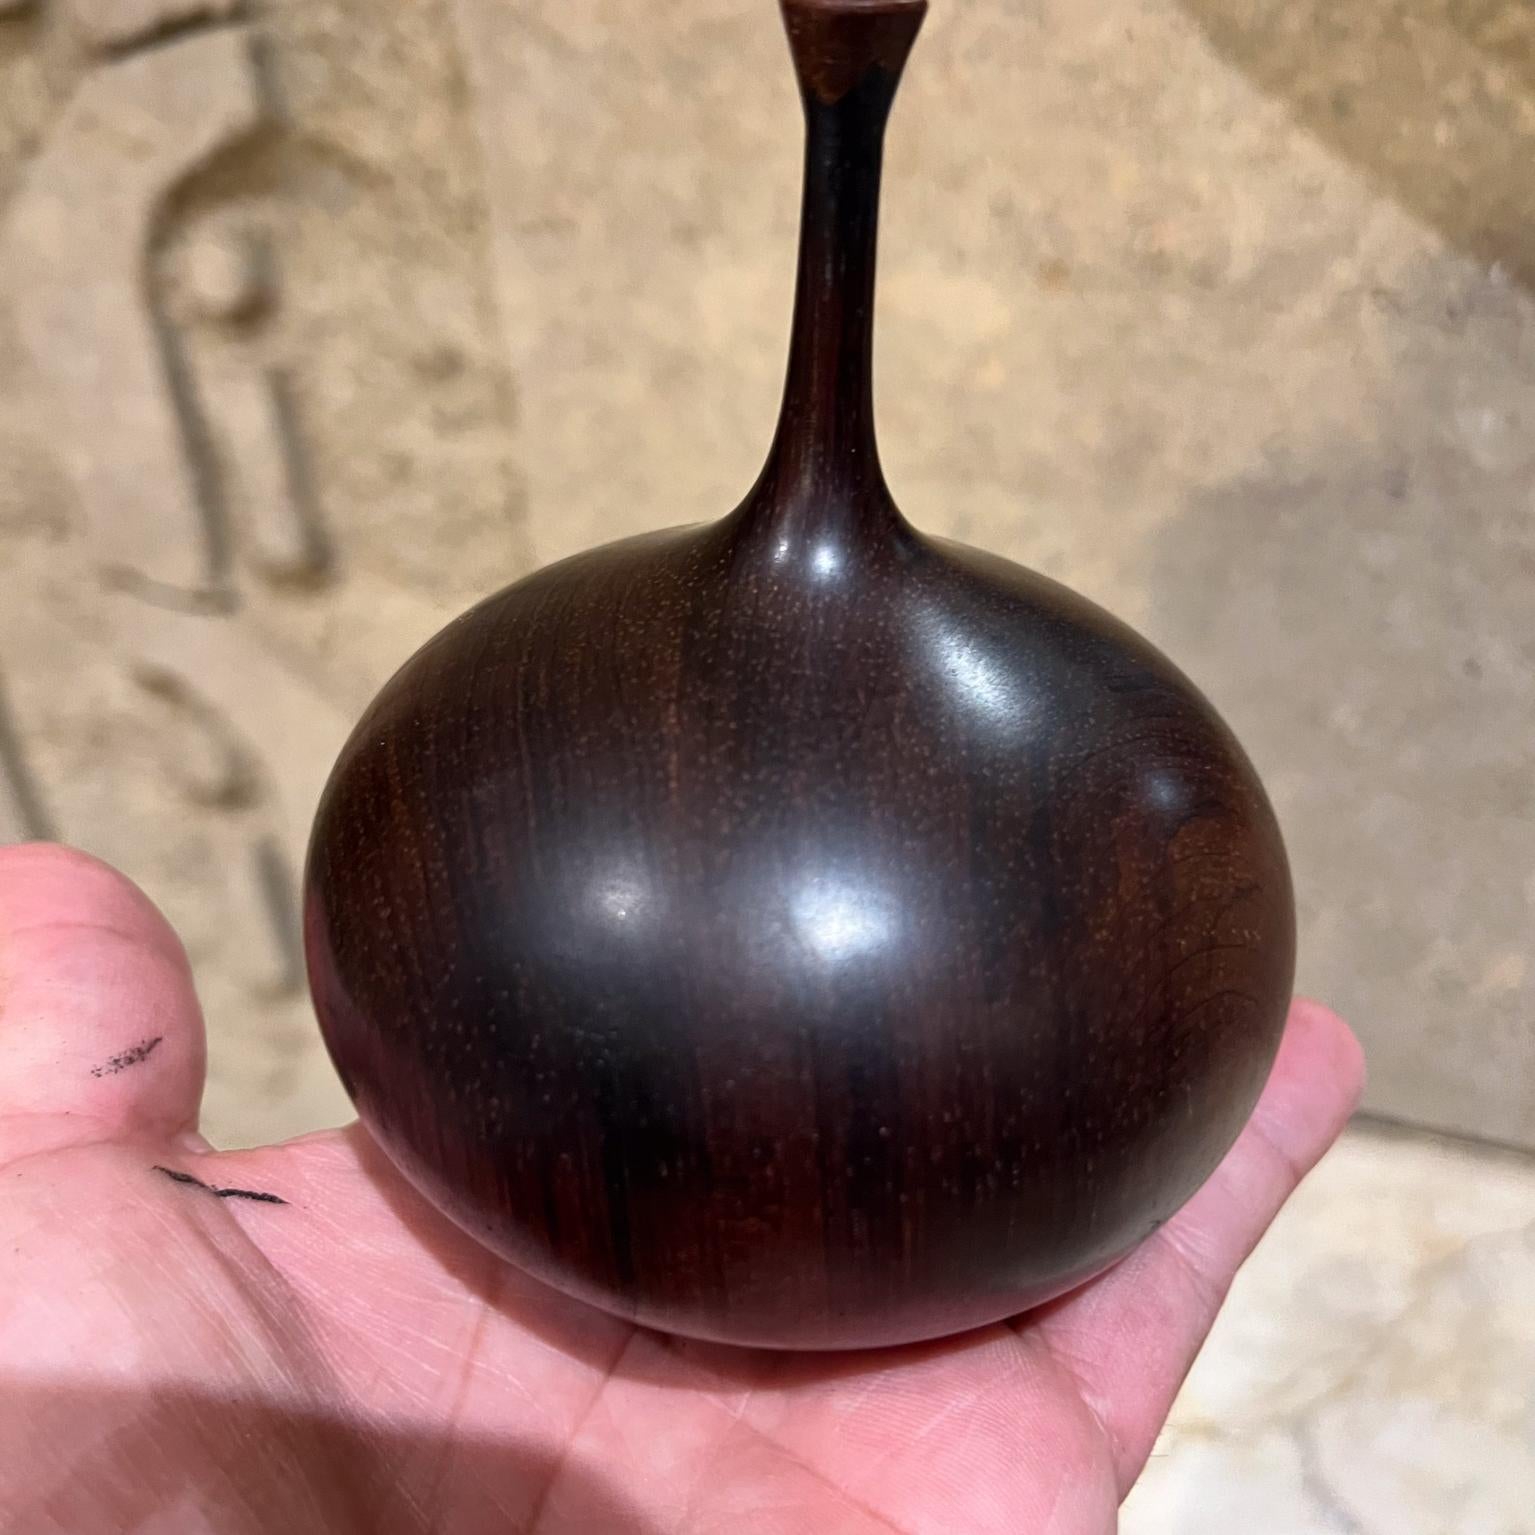 Exotic Cocobolo Turned Wood Weed Pot Bud Vase Vessel
in the style of Rude Osolnik
4 x 4 diameter
No signature
Preowned original vintage.
Refer to images.